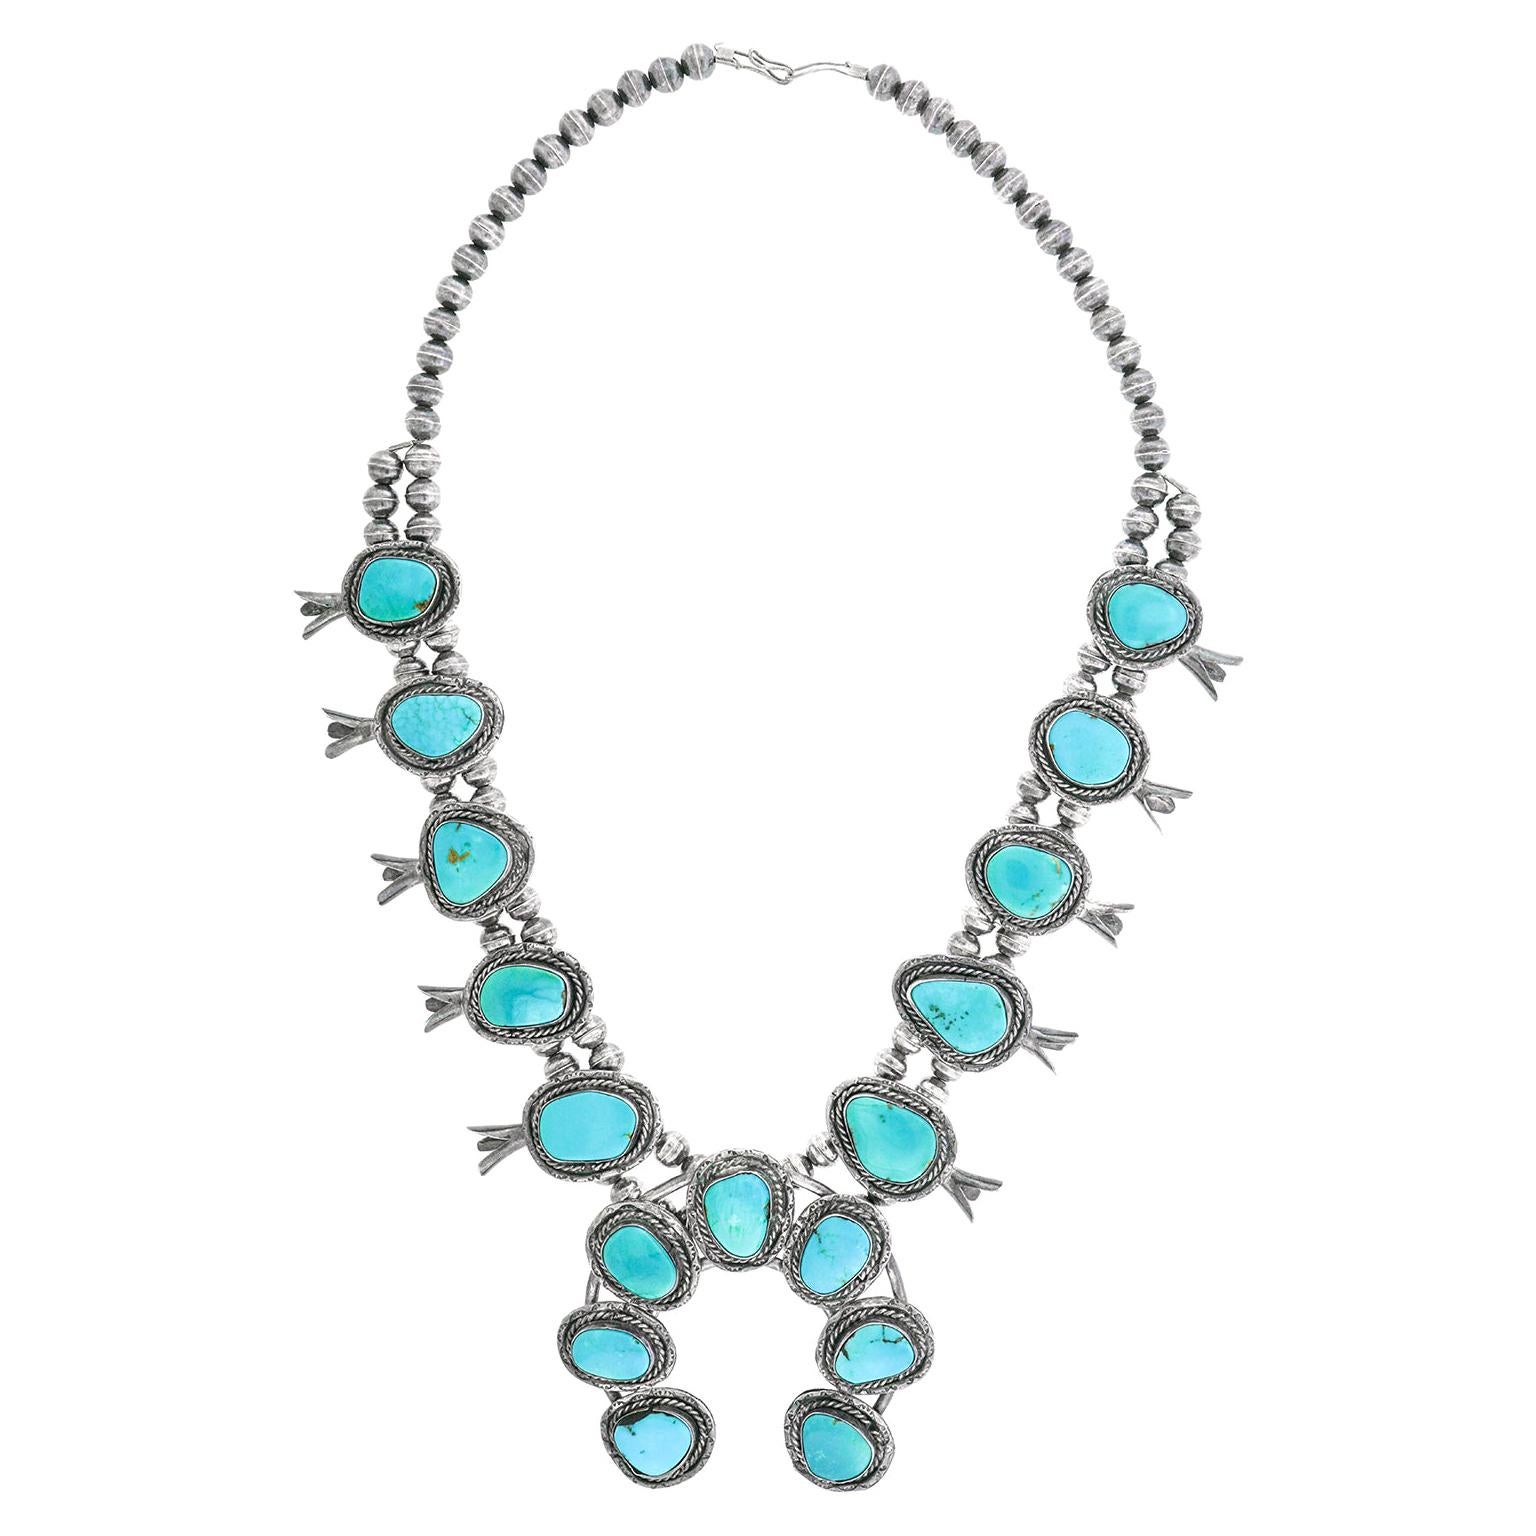 Spectacular Turquoise-Set Navajo Squash Blossom Necklace